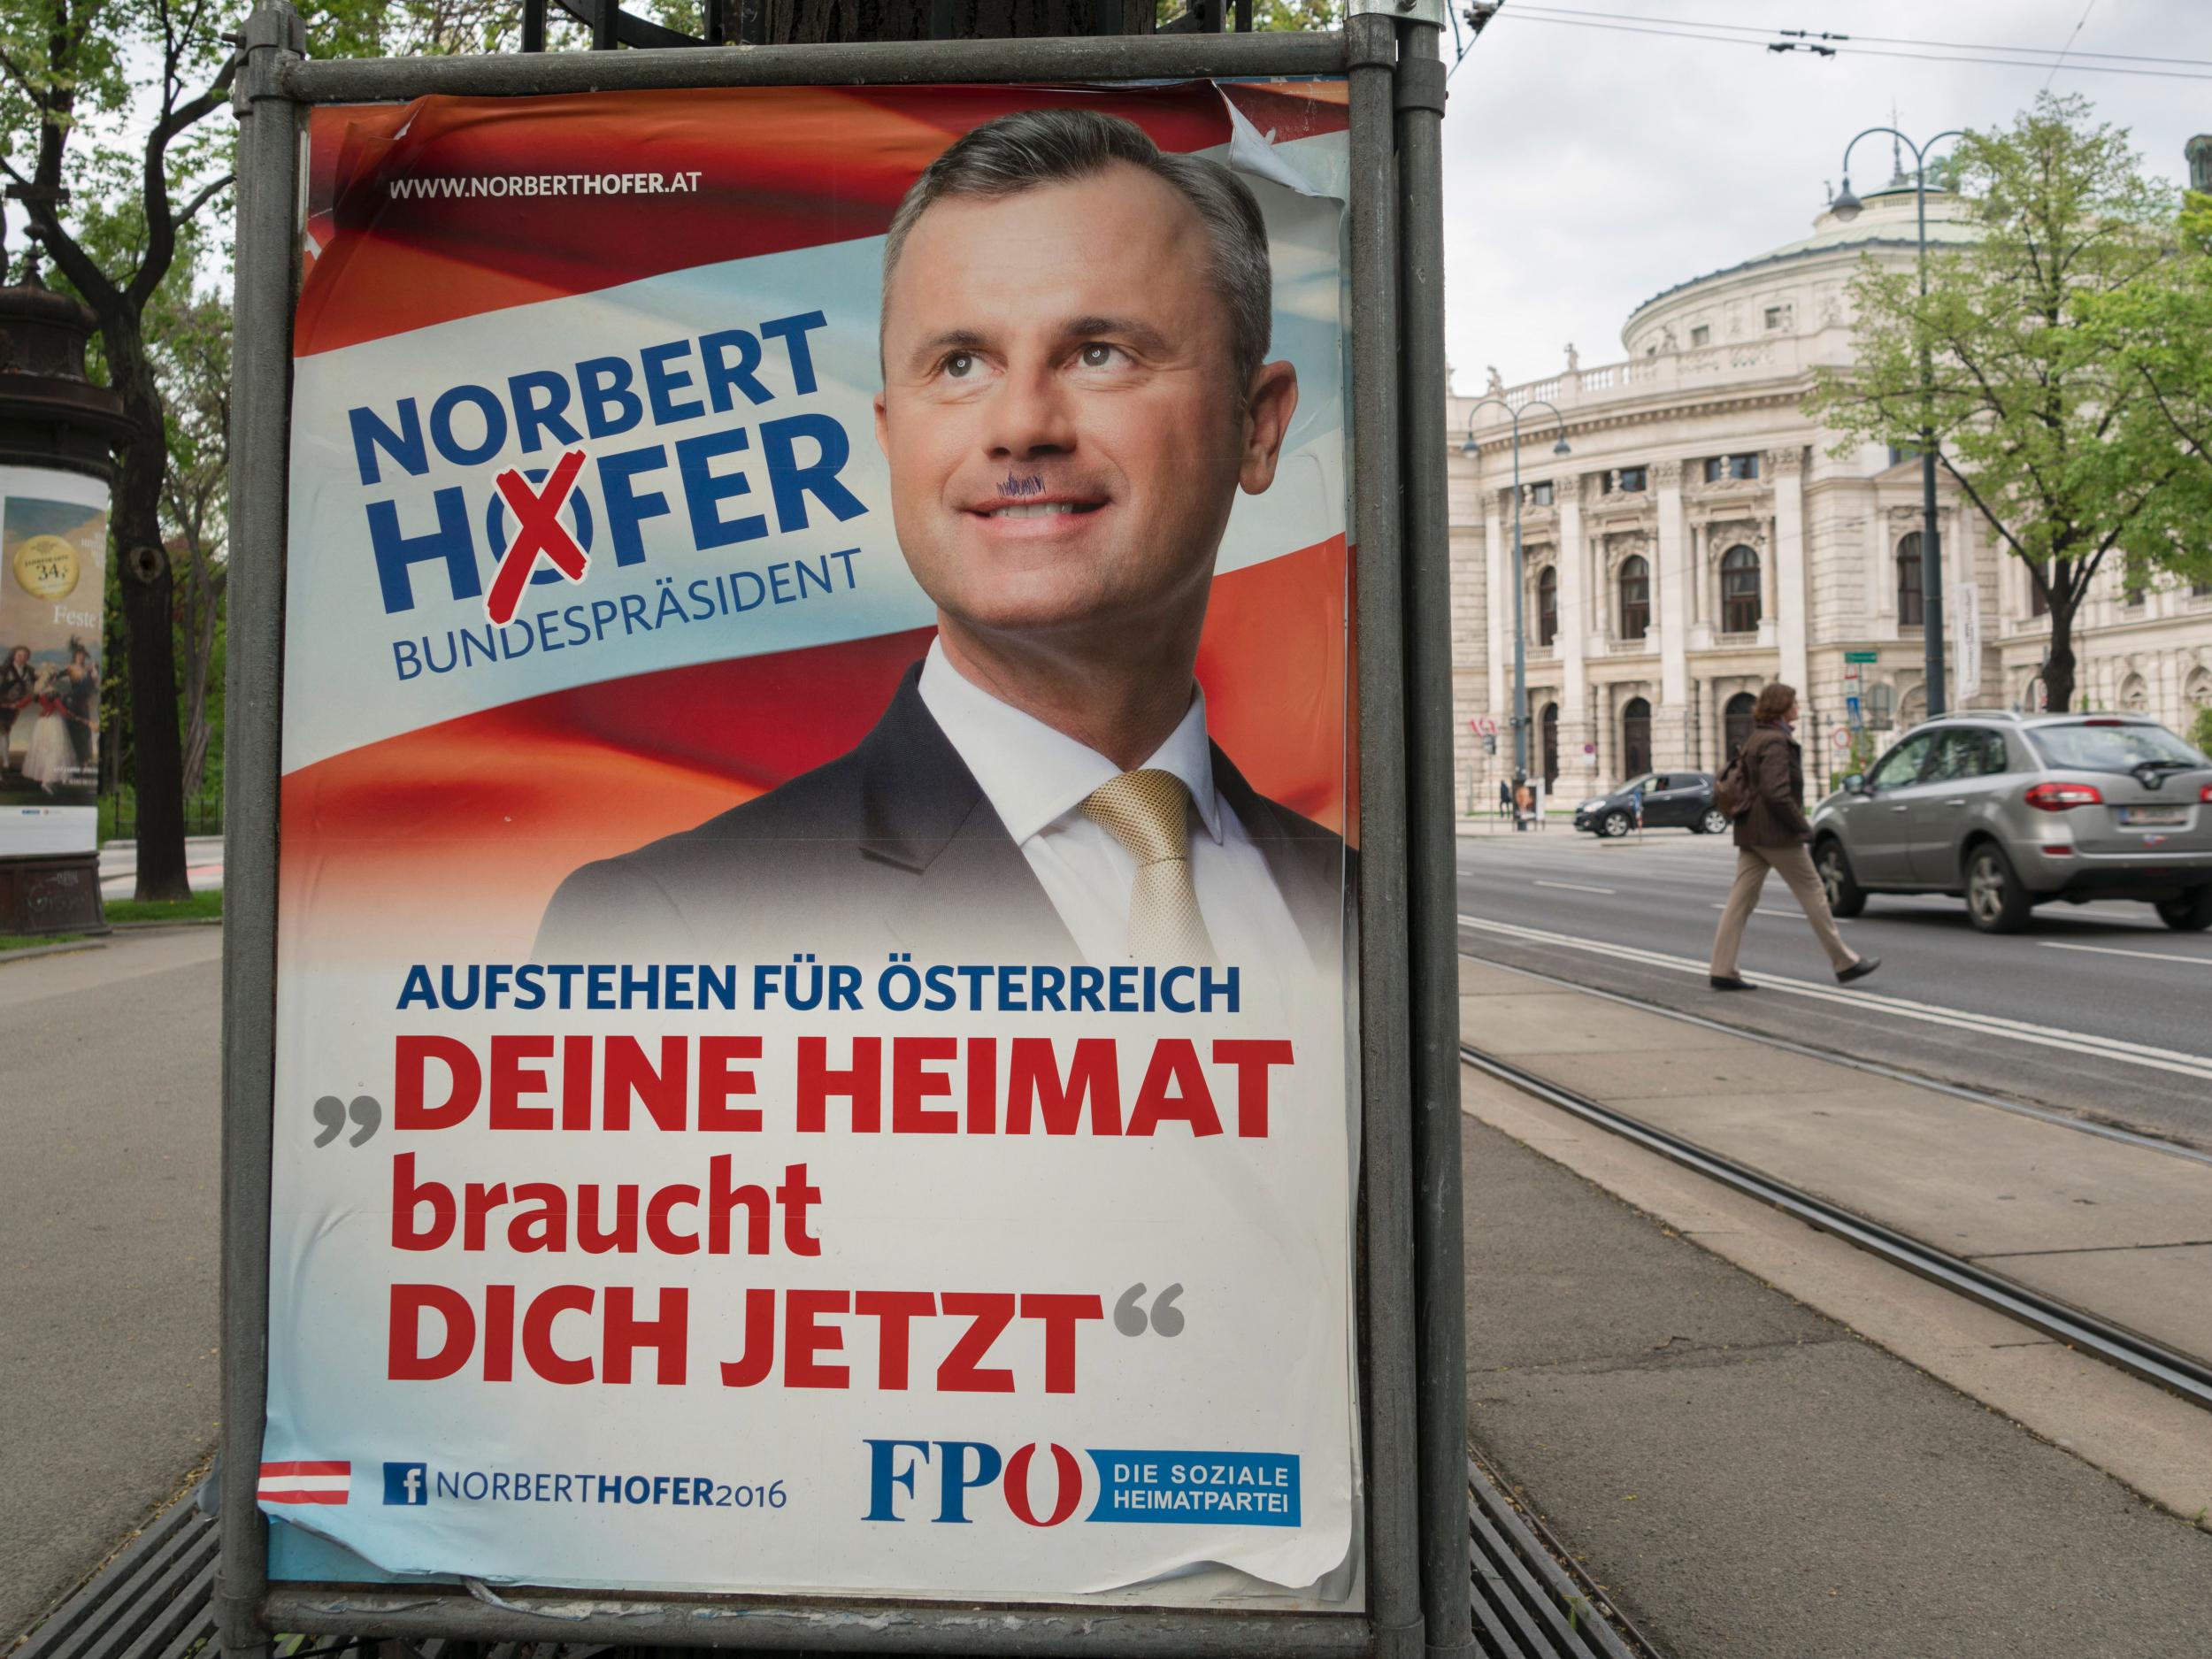 An election campaign poster of presidential candidate Norbert Hofer from the Freedom Party of Austria seen in Vienna